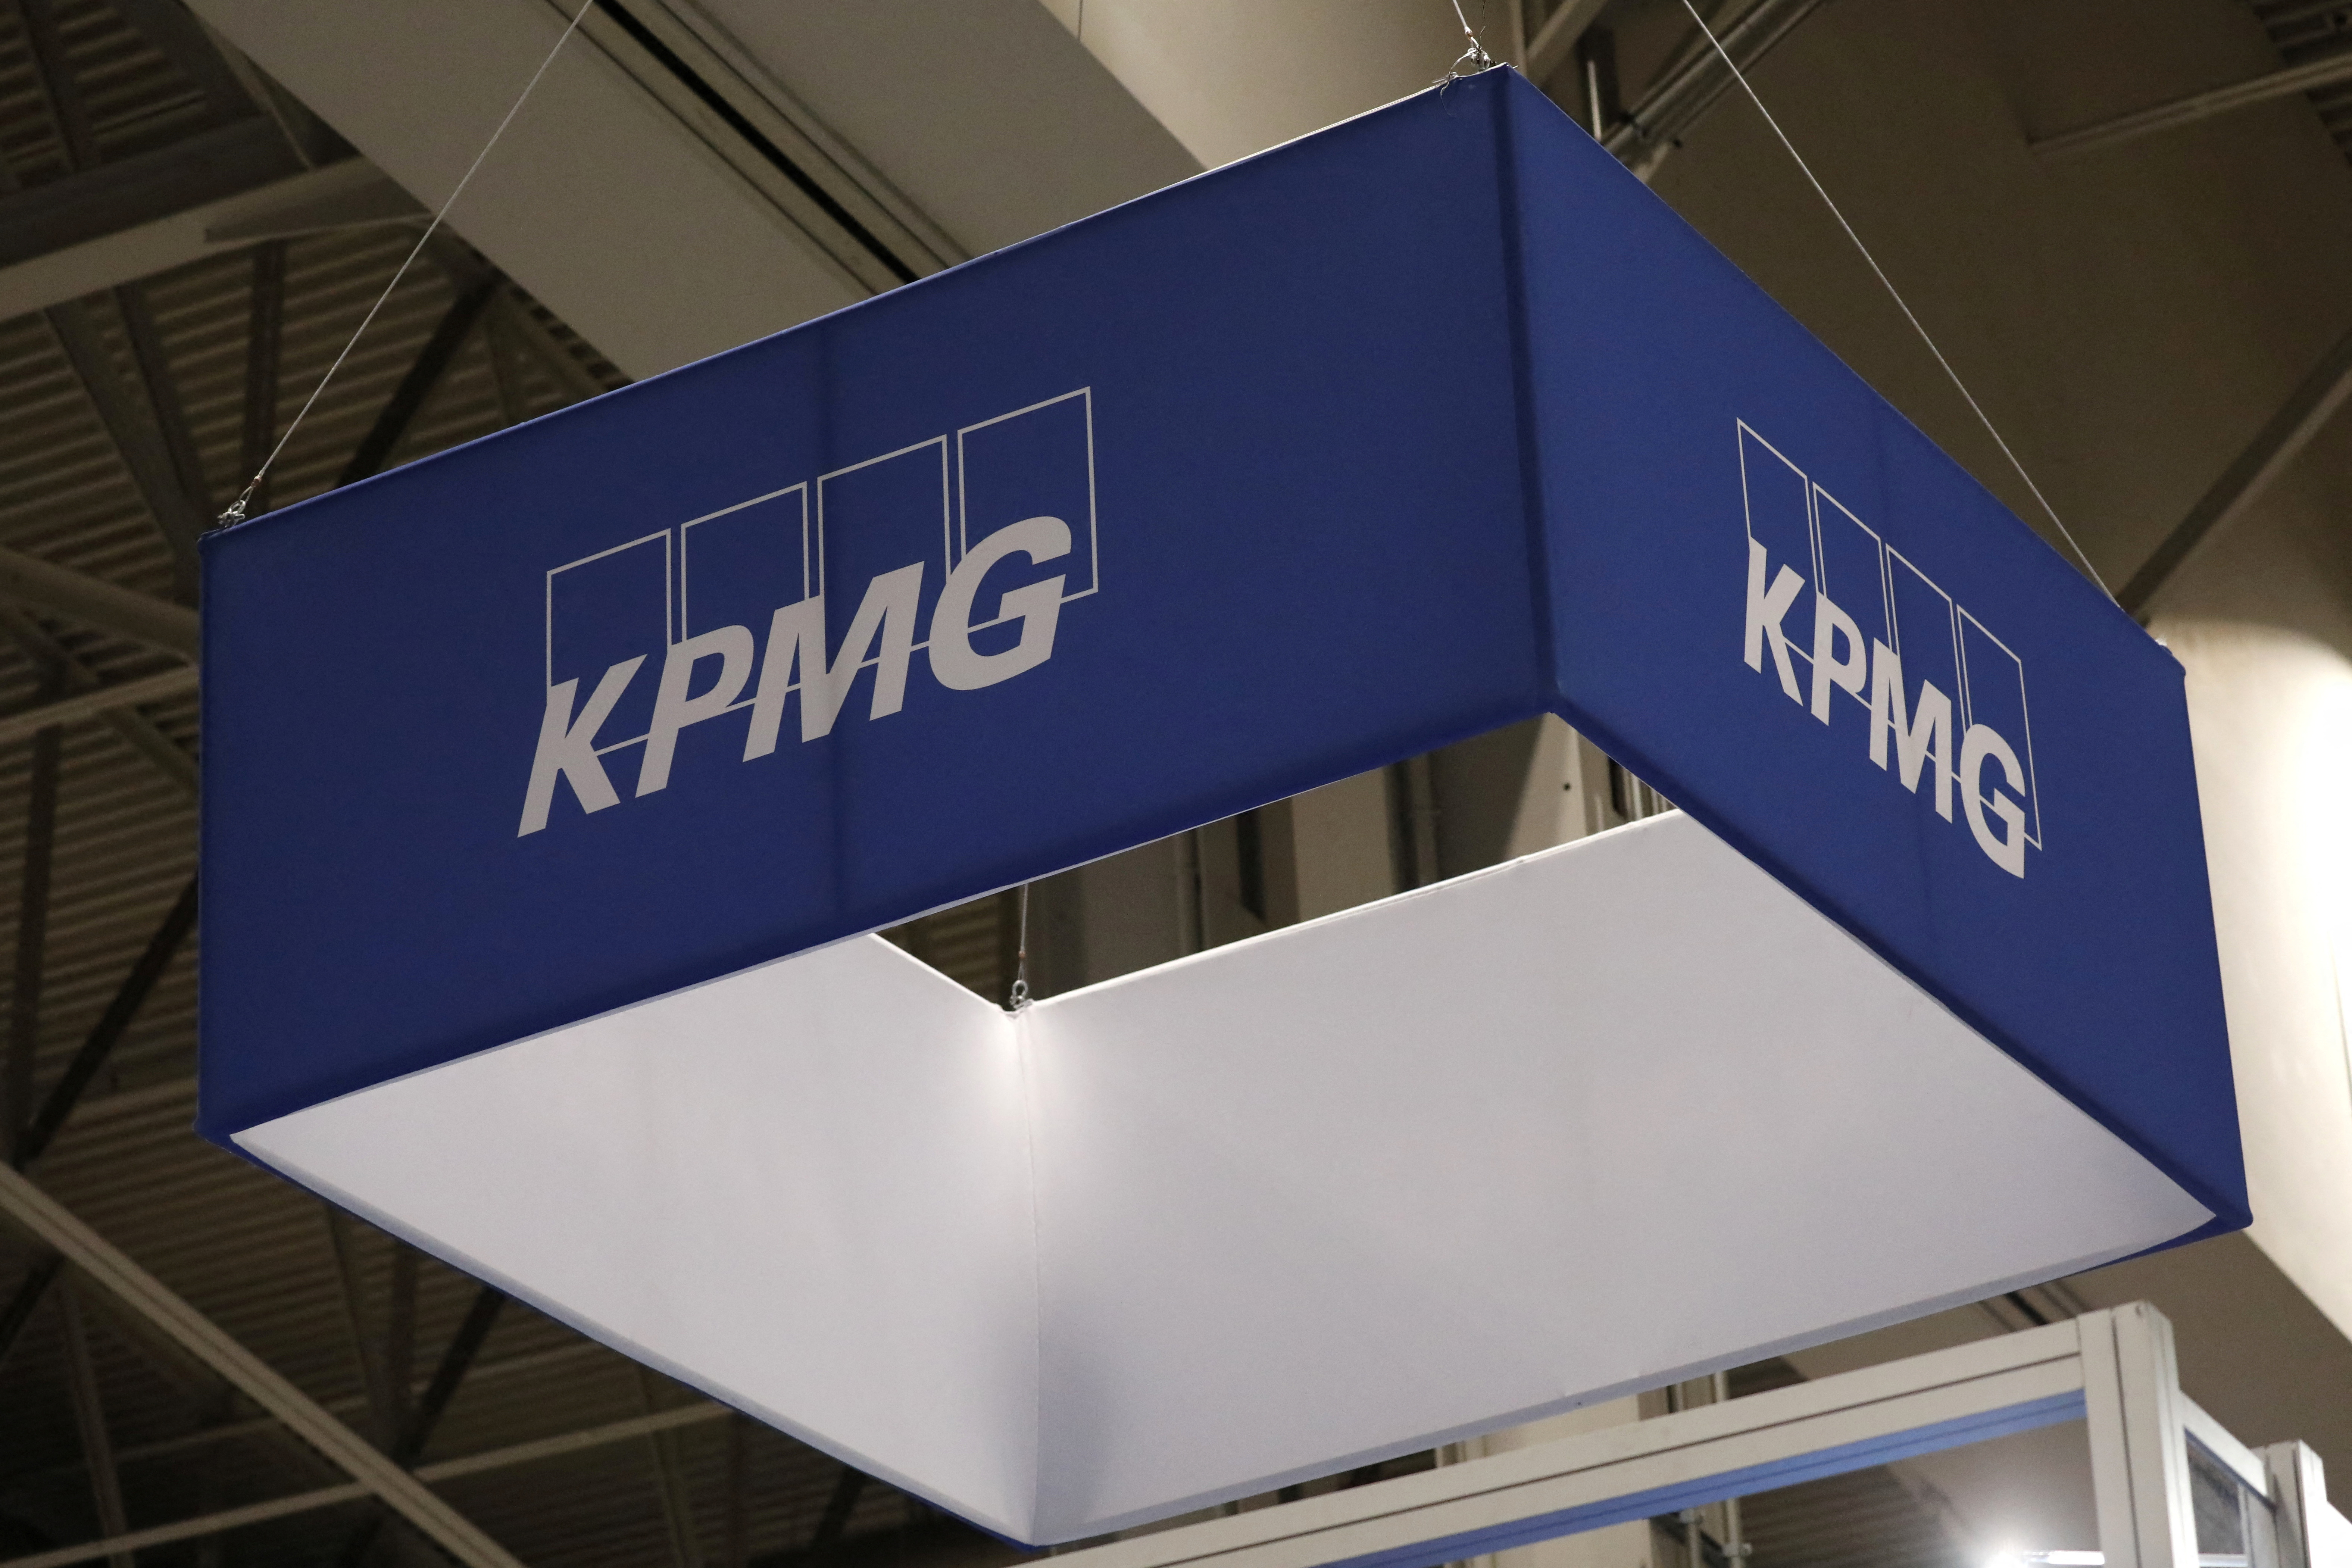 Banner for professional services network KPMG in Toronto